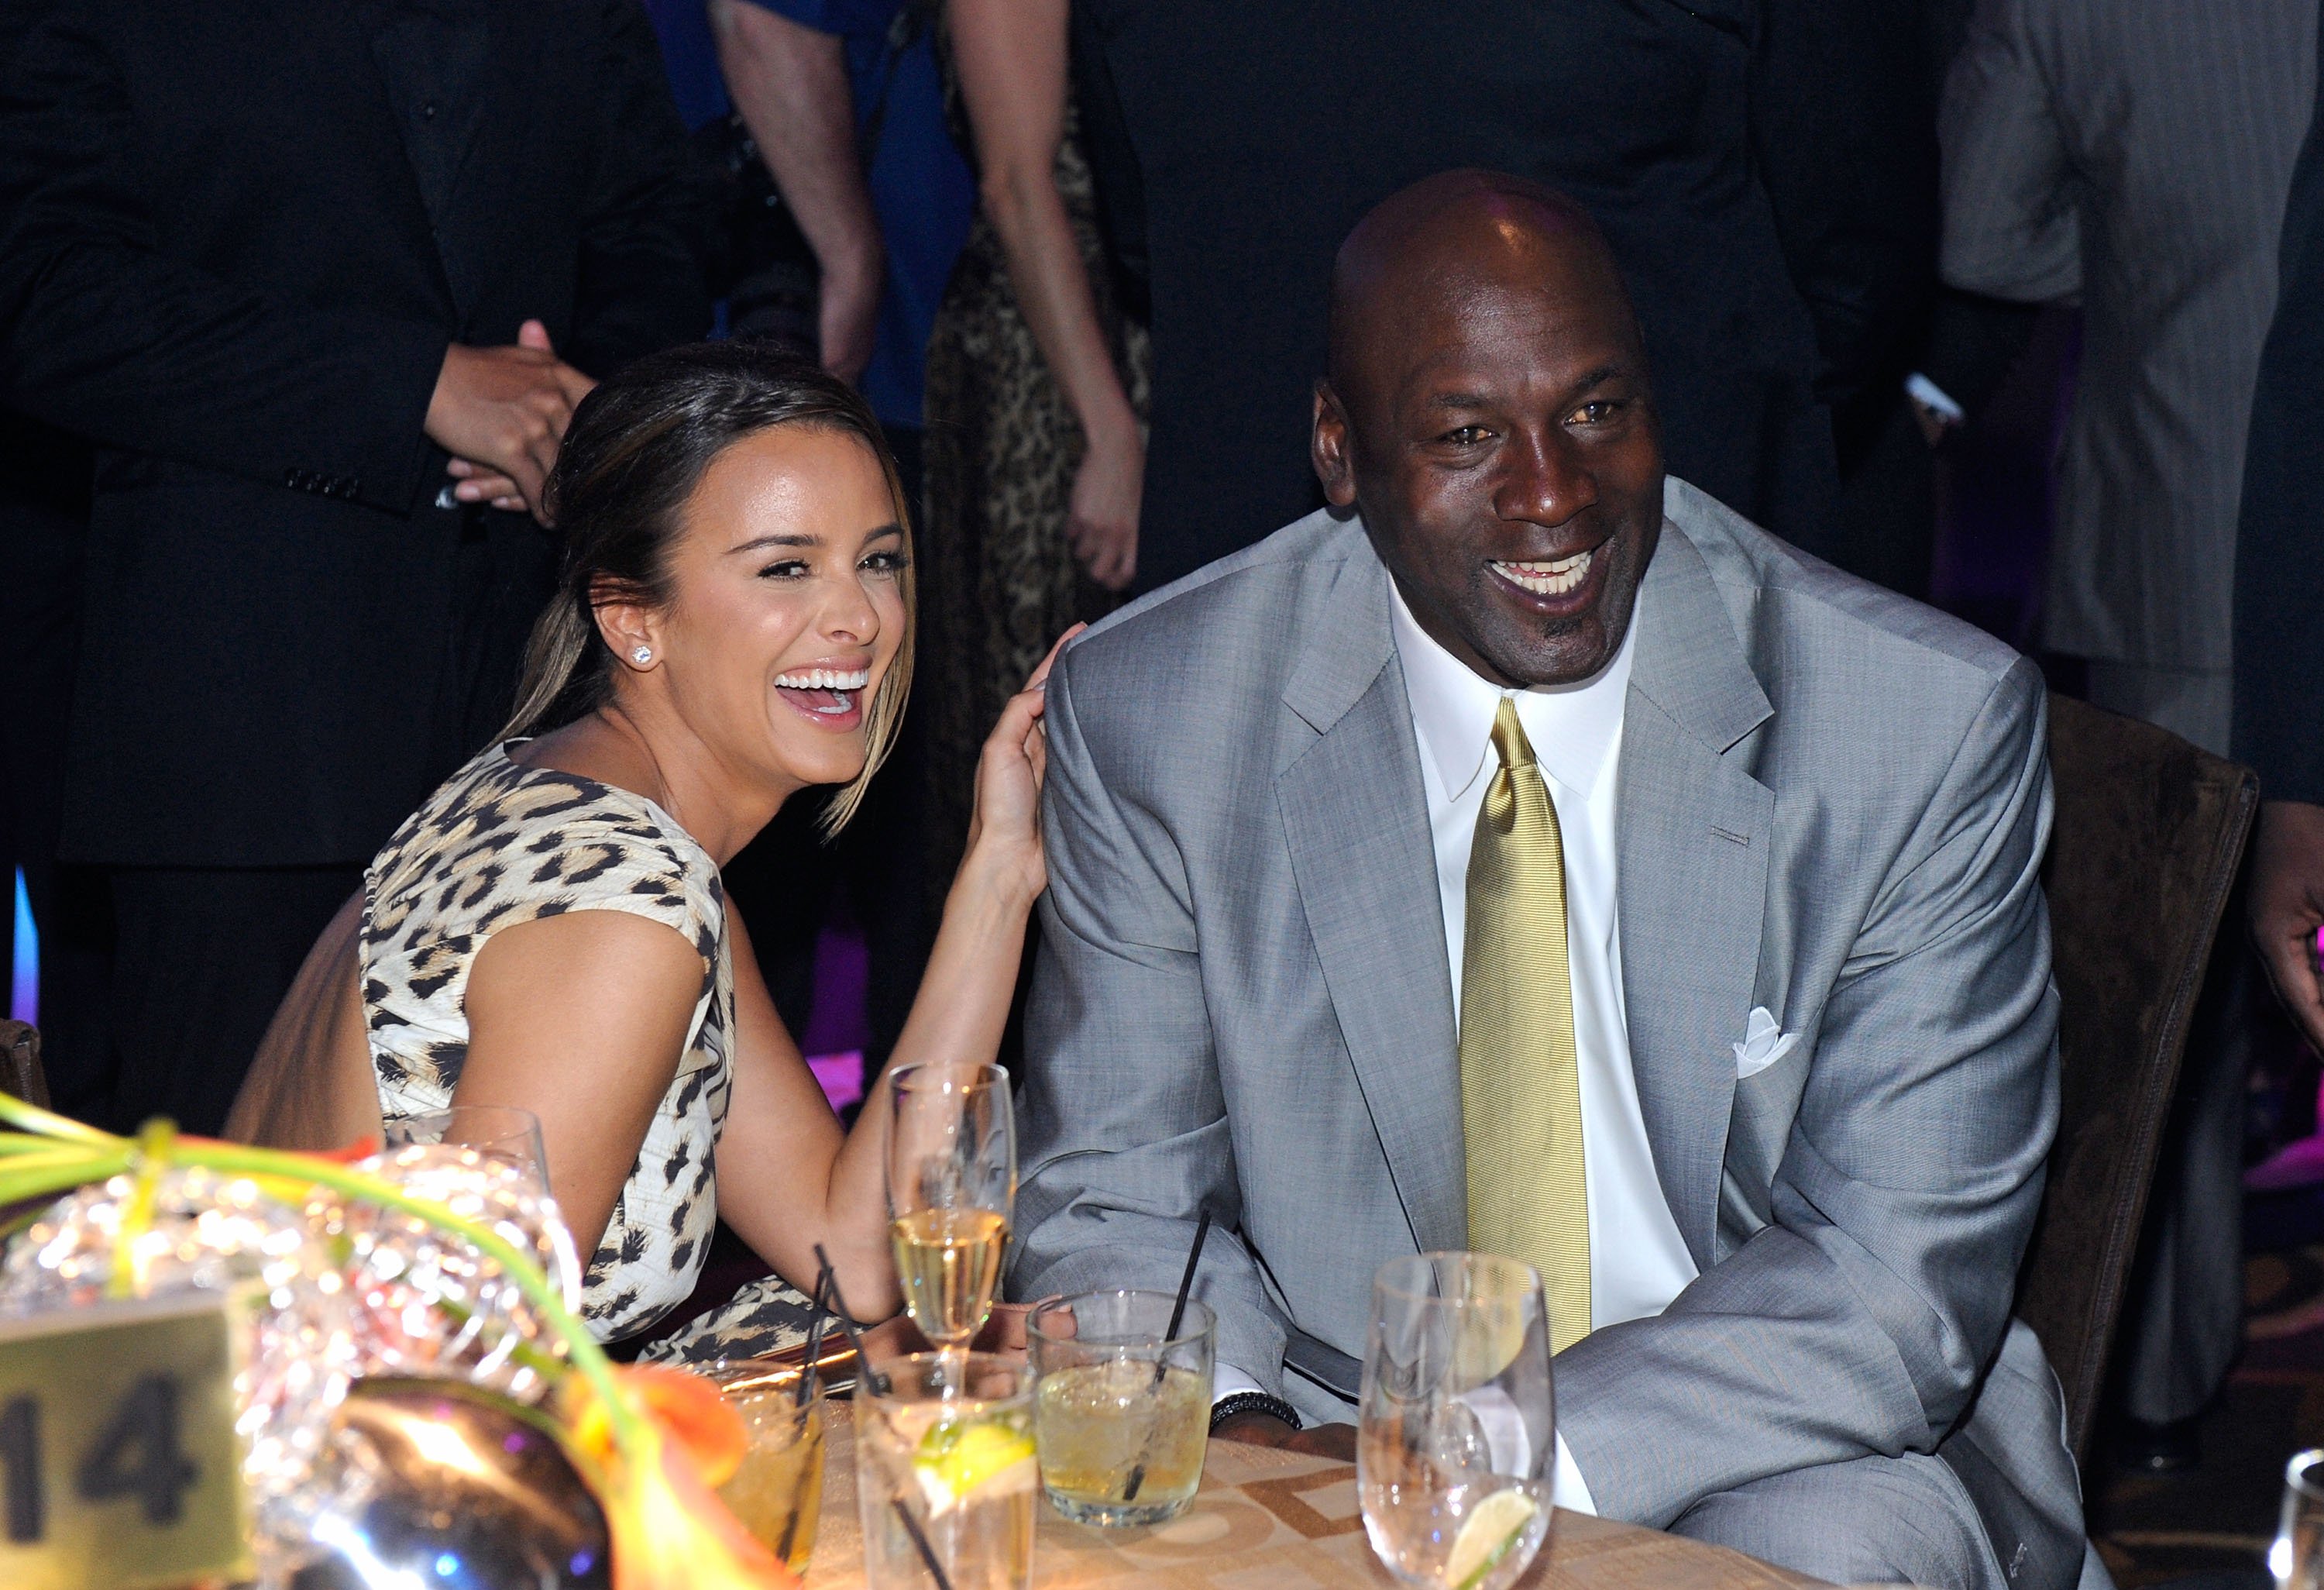 Michael Jordan and Yvette Prieto at the Aria Resort & Casino at CityCenter March 30, 2011 in Las Vegas, Nevada | Source: Getty Images